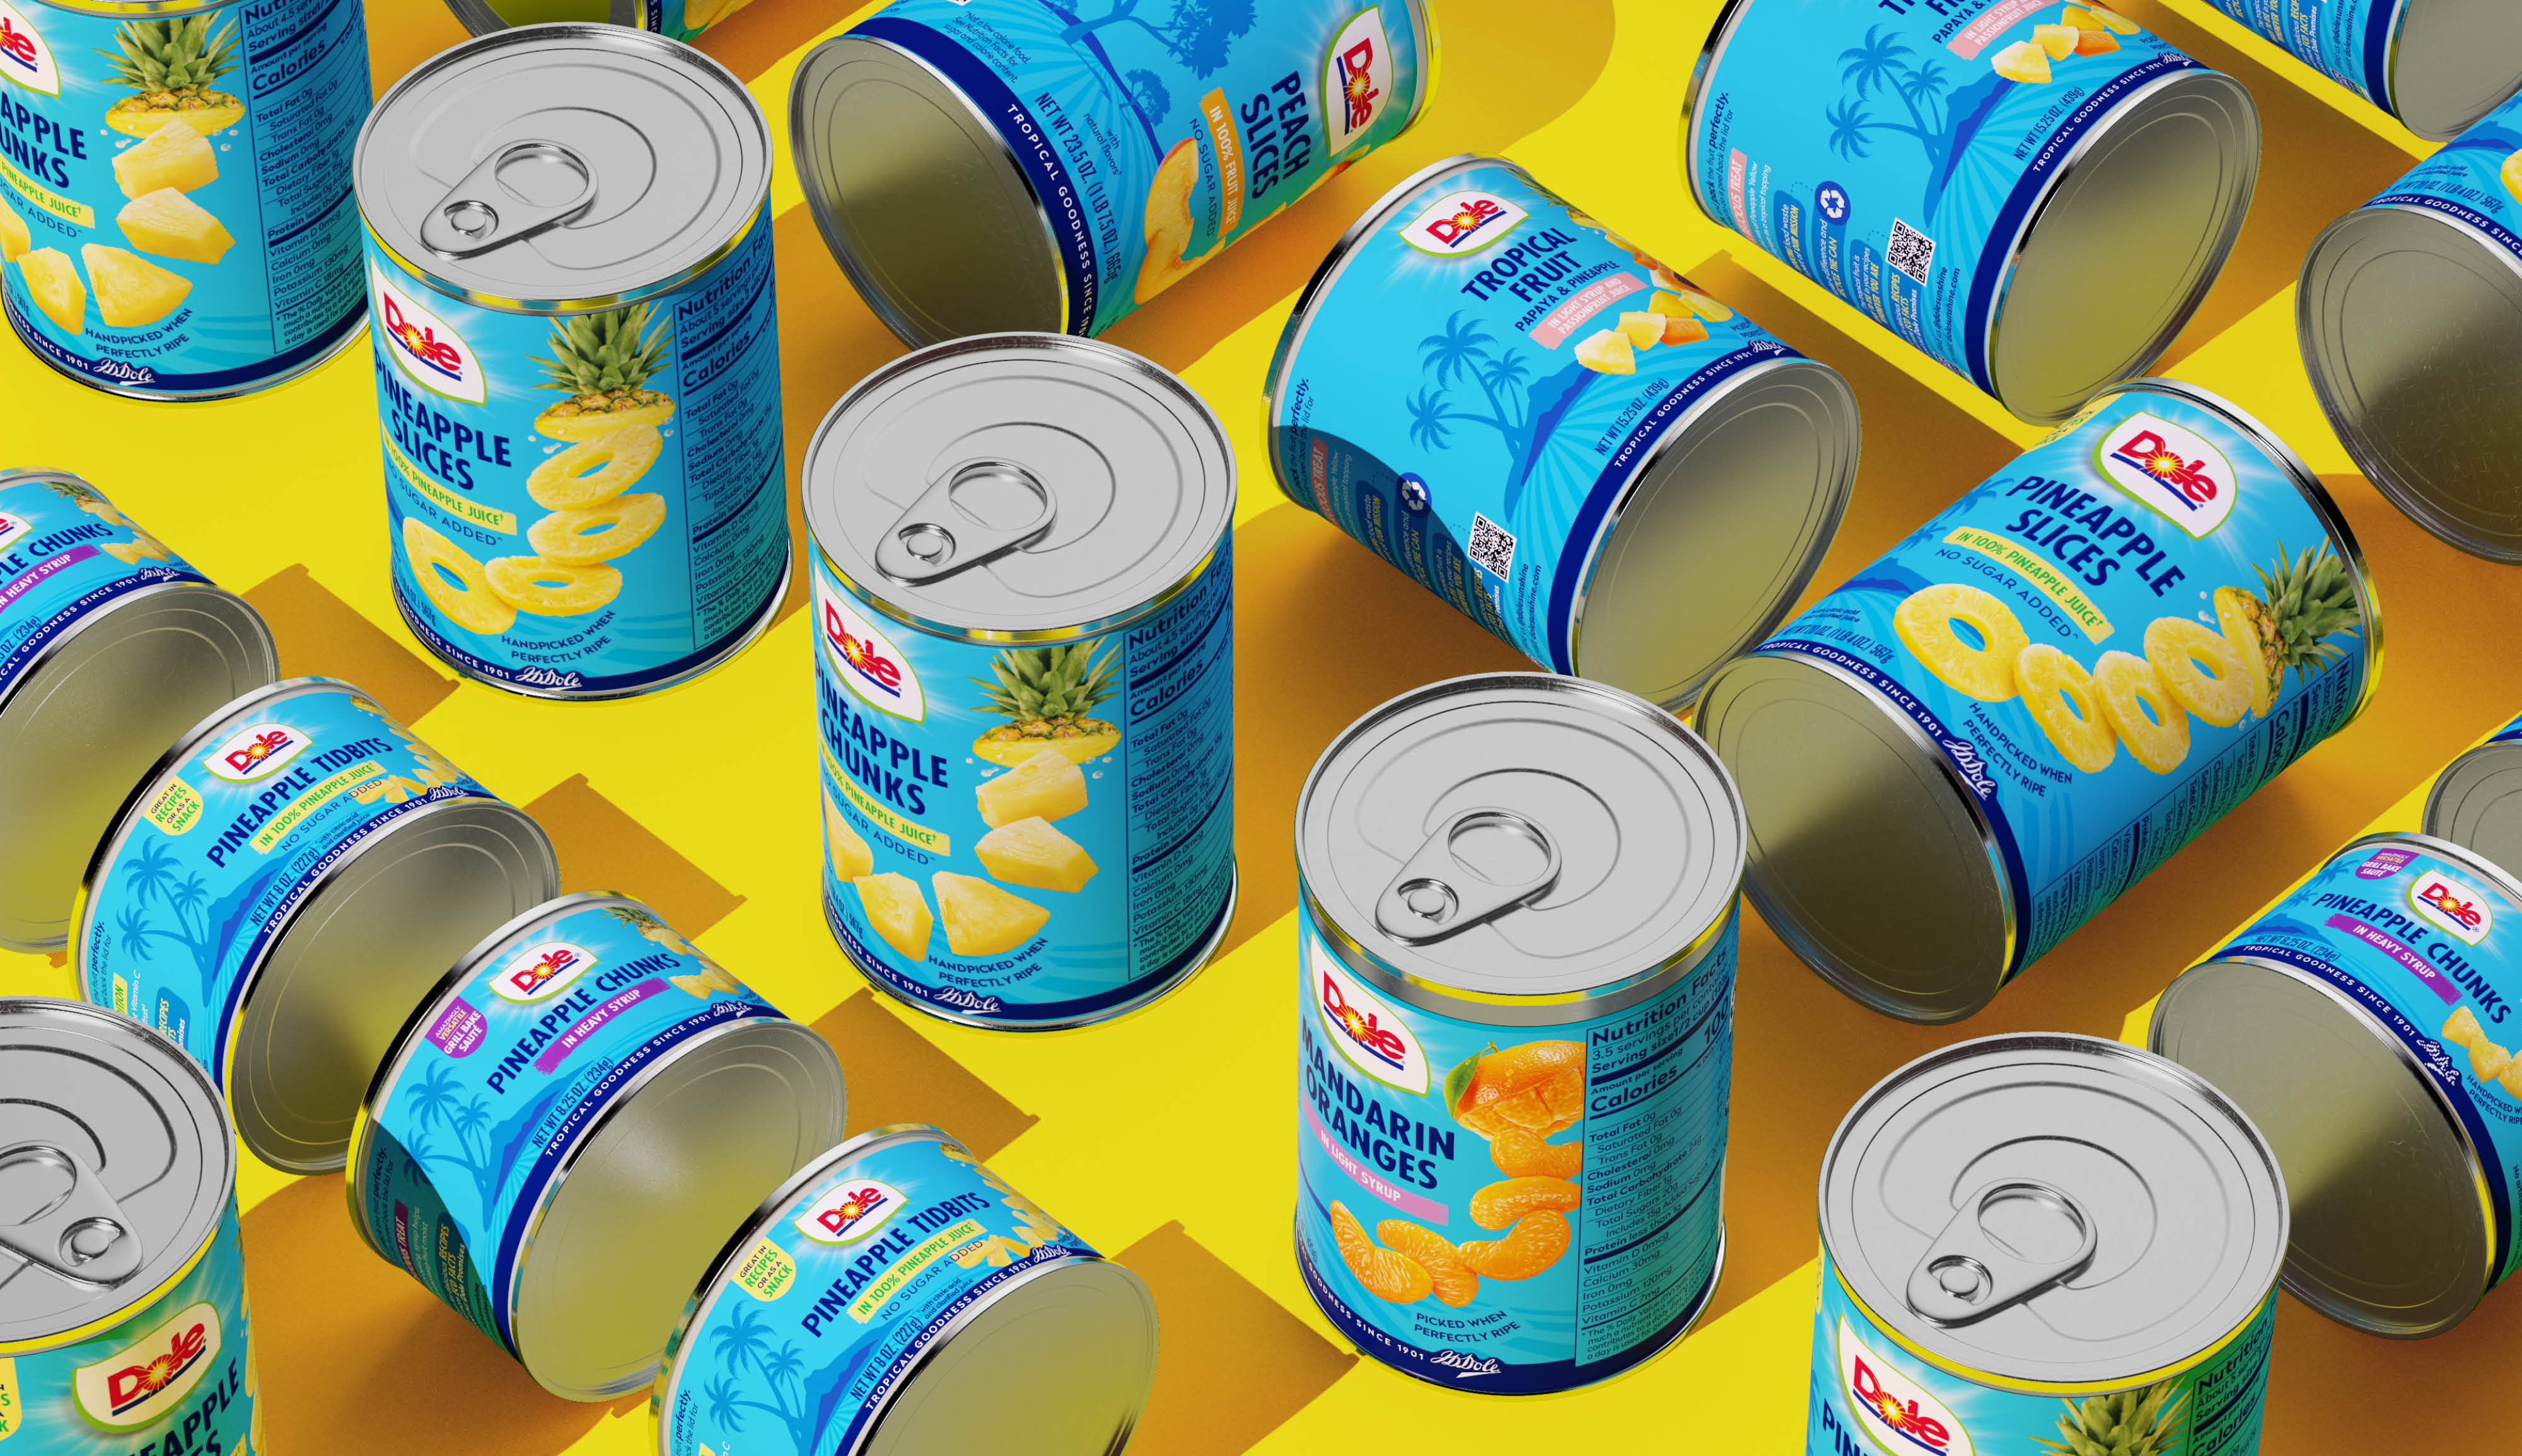 A Breath of Fresh Island Air. 1HQ Netherlands Refreshes Dole Canned Fruit Packaging